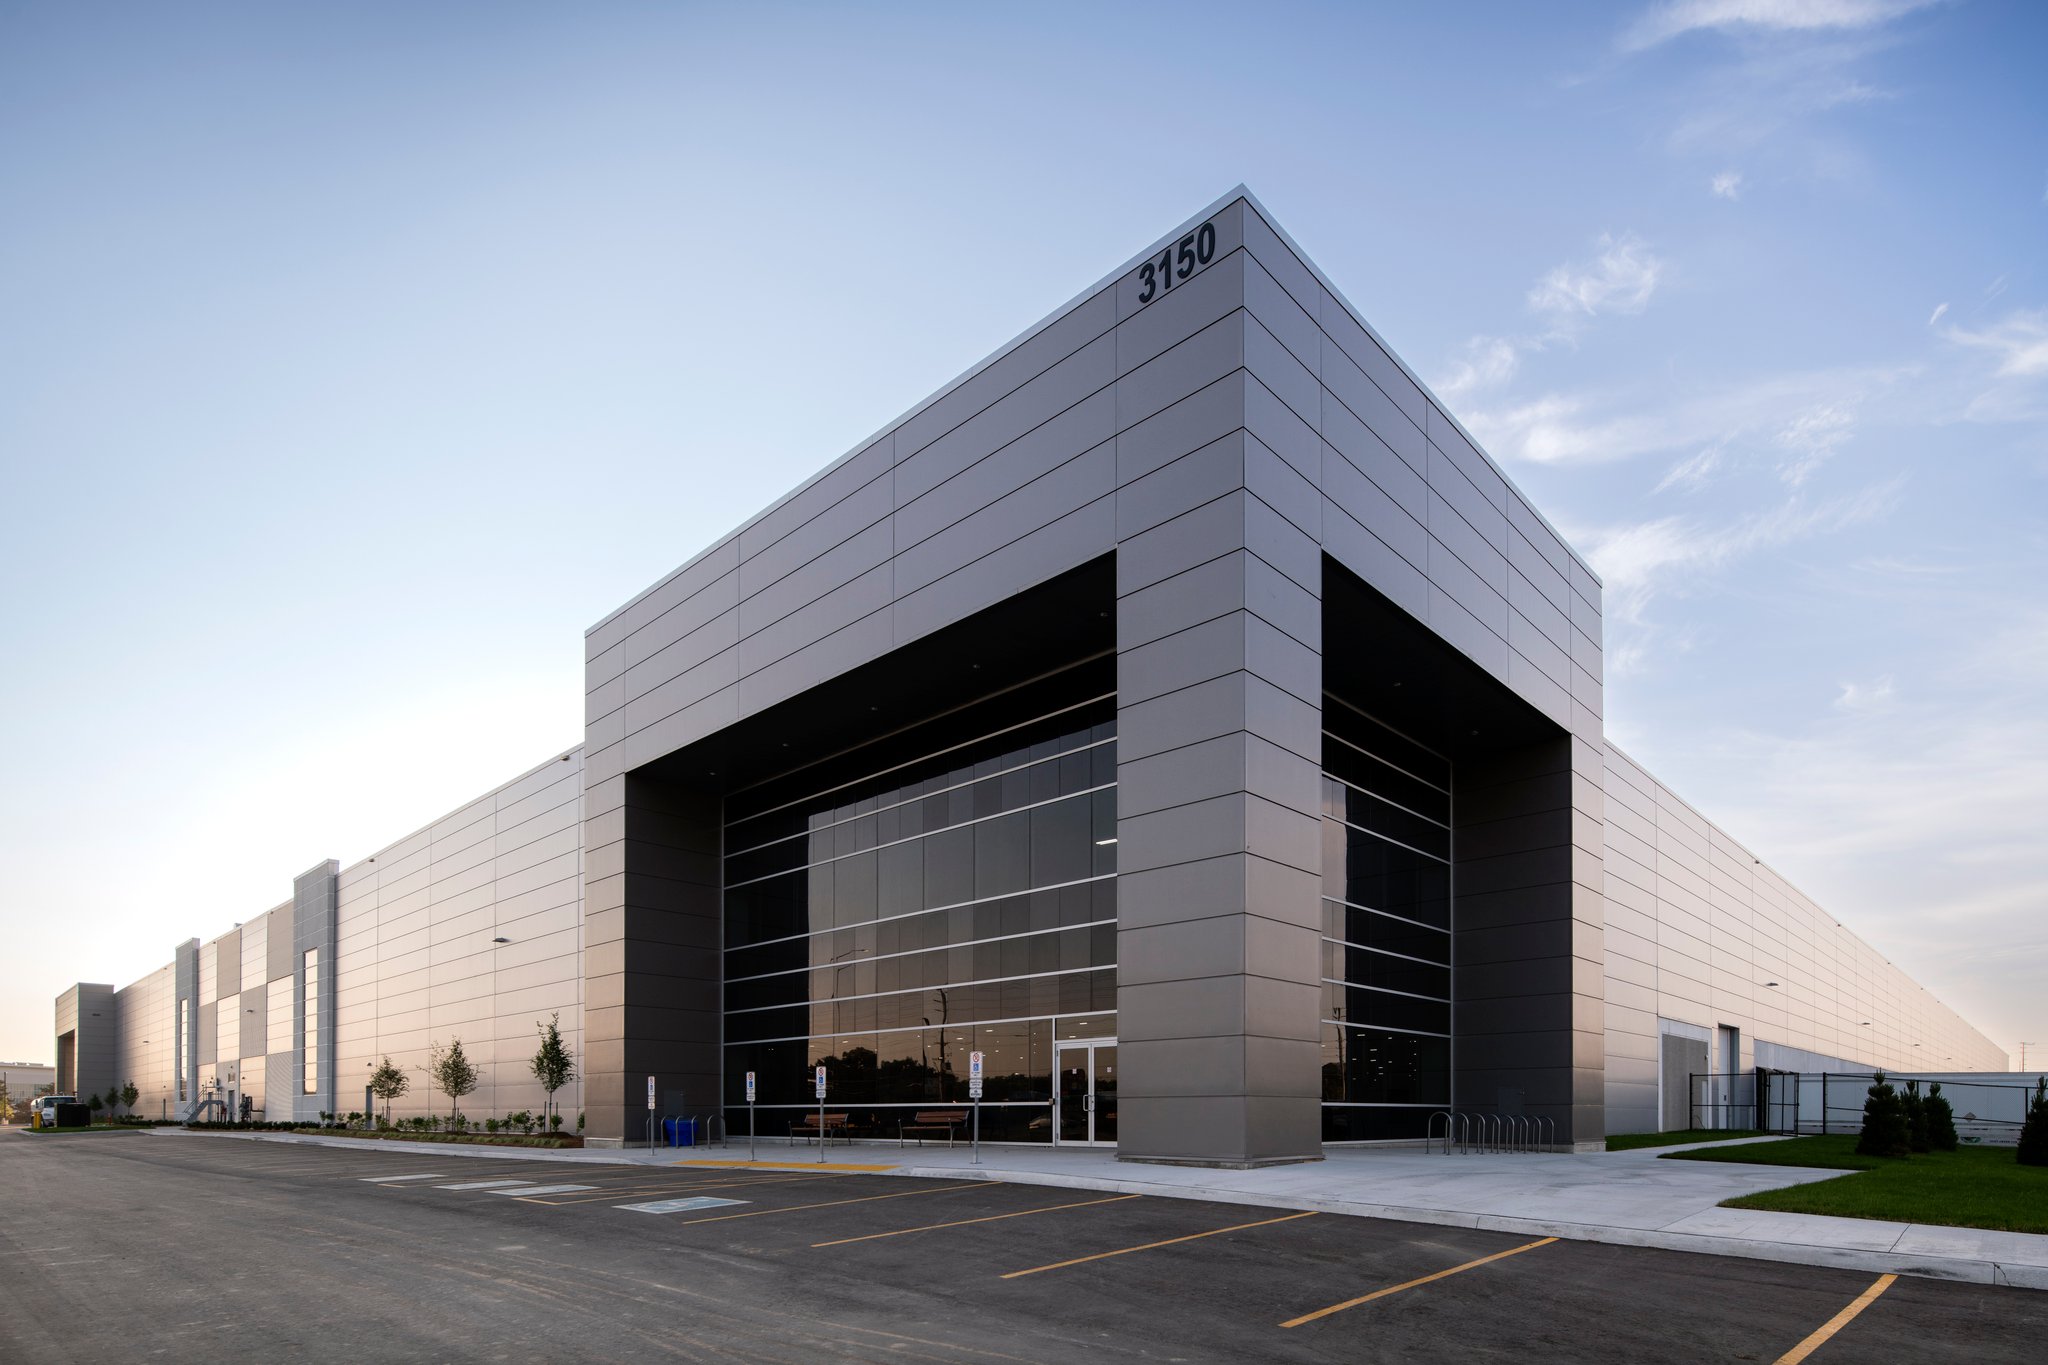 Industrial architecture image for home depot warehouse in mississauga